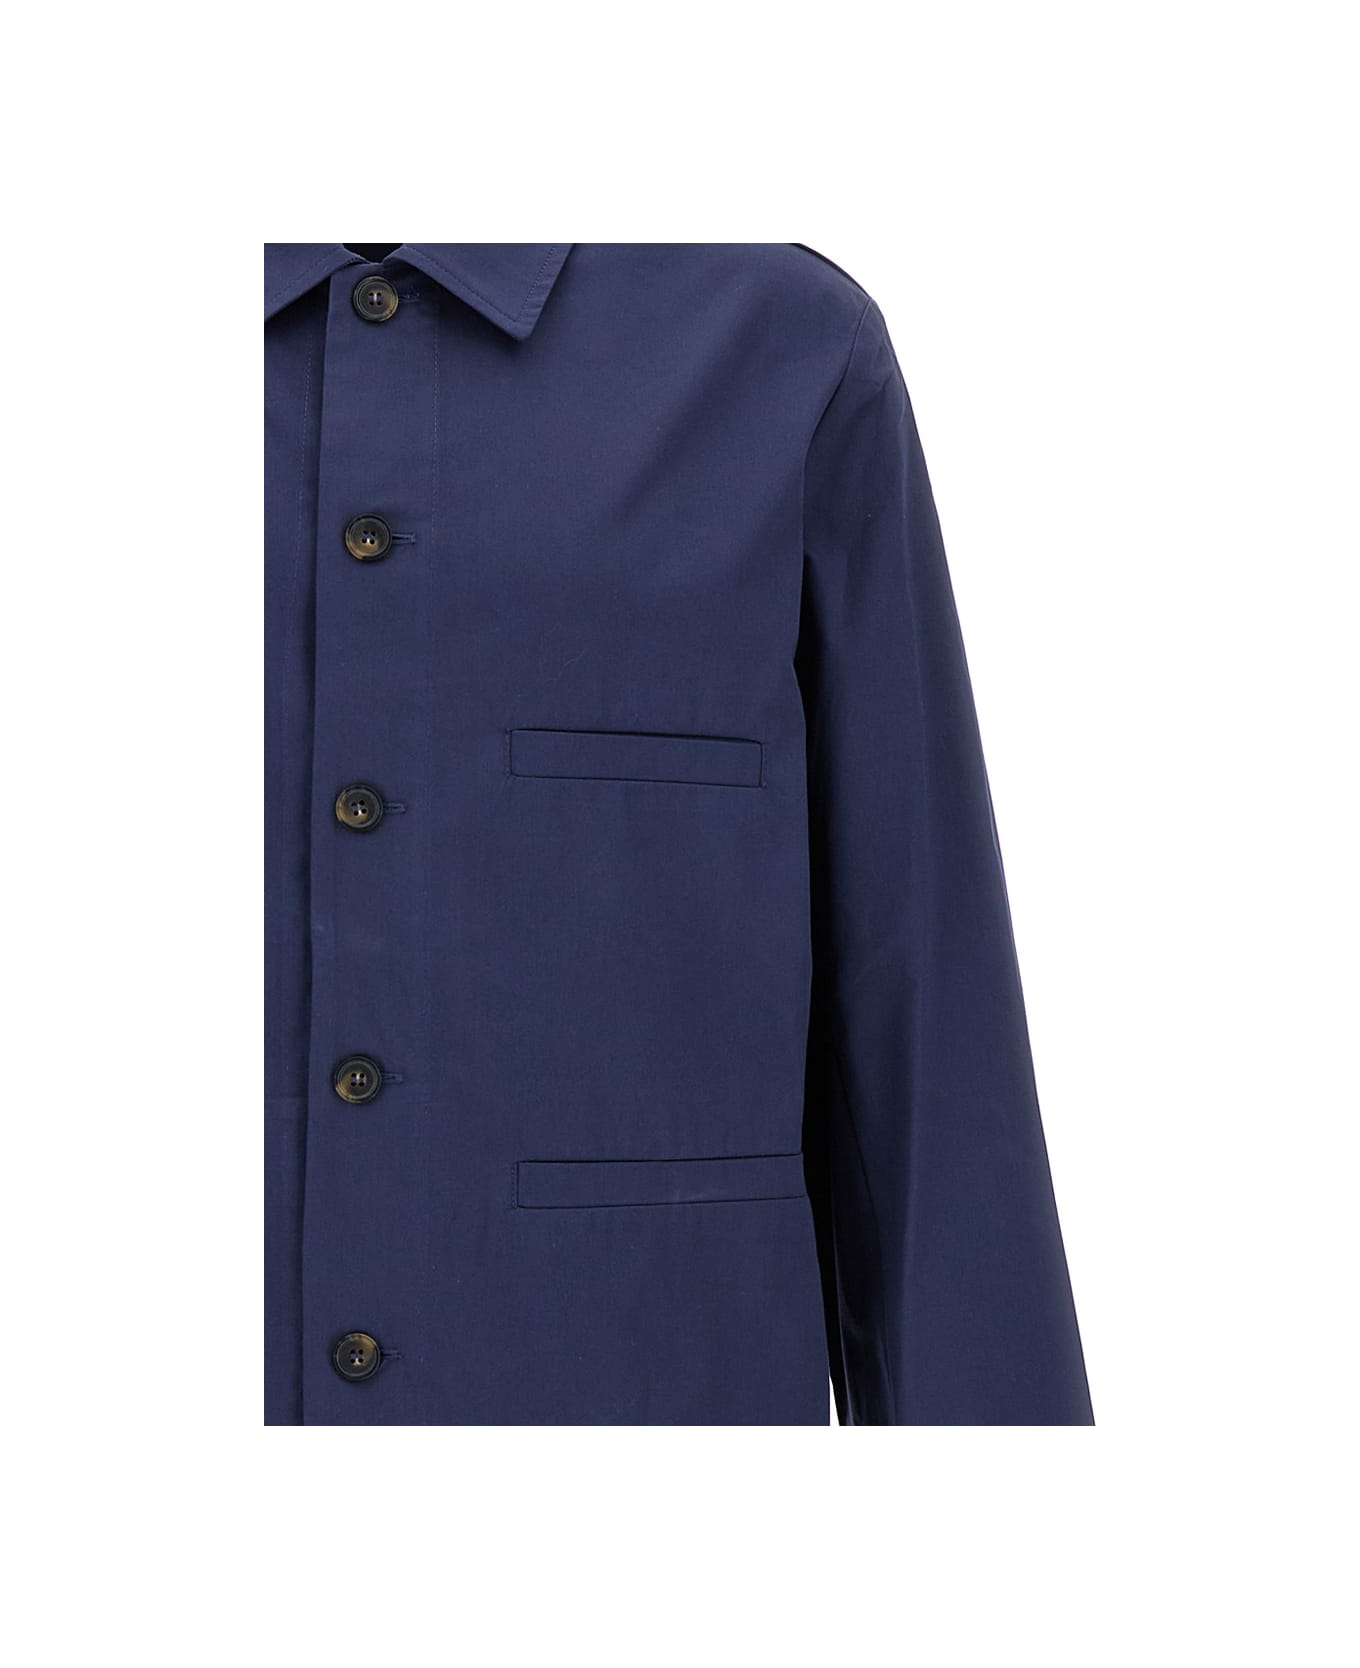 A.P.C. Jacket-shirt With Front Pocket - Blu シャツ